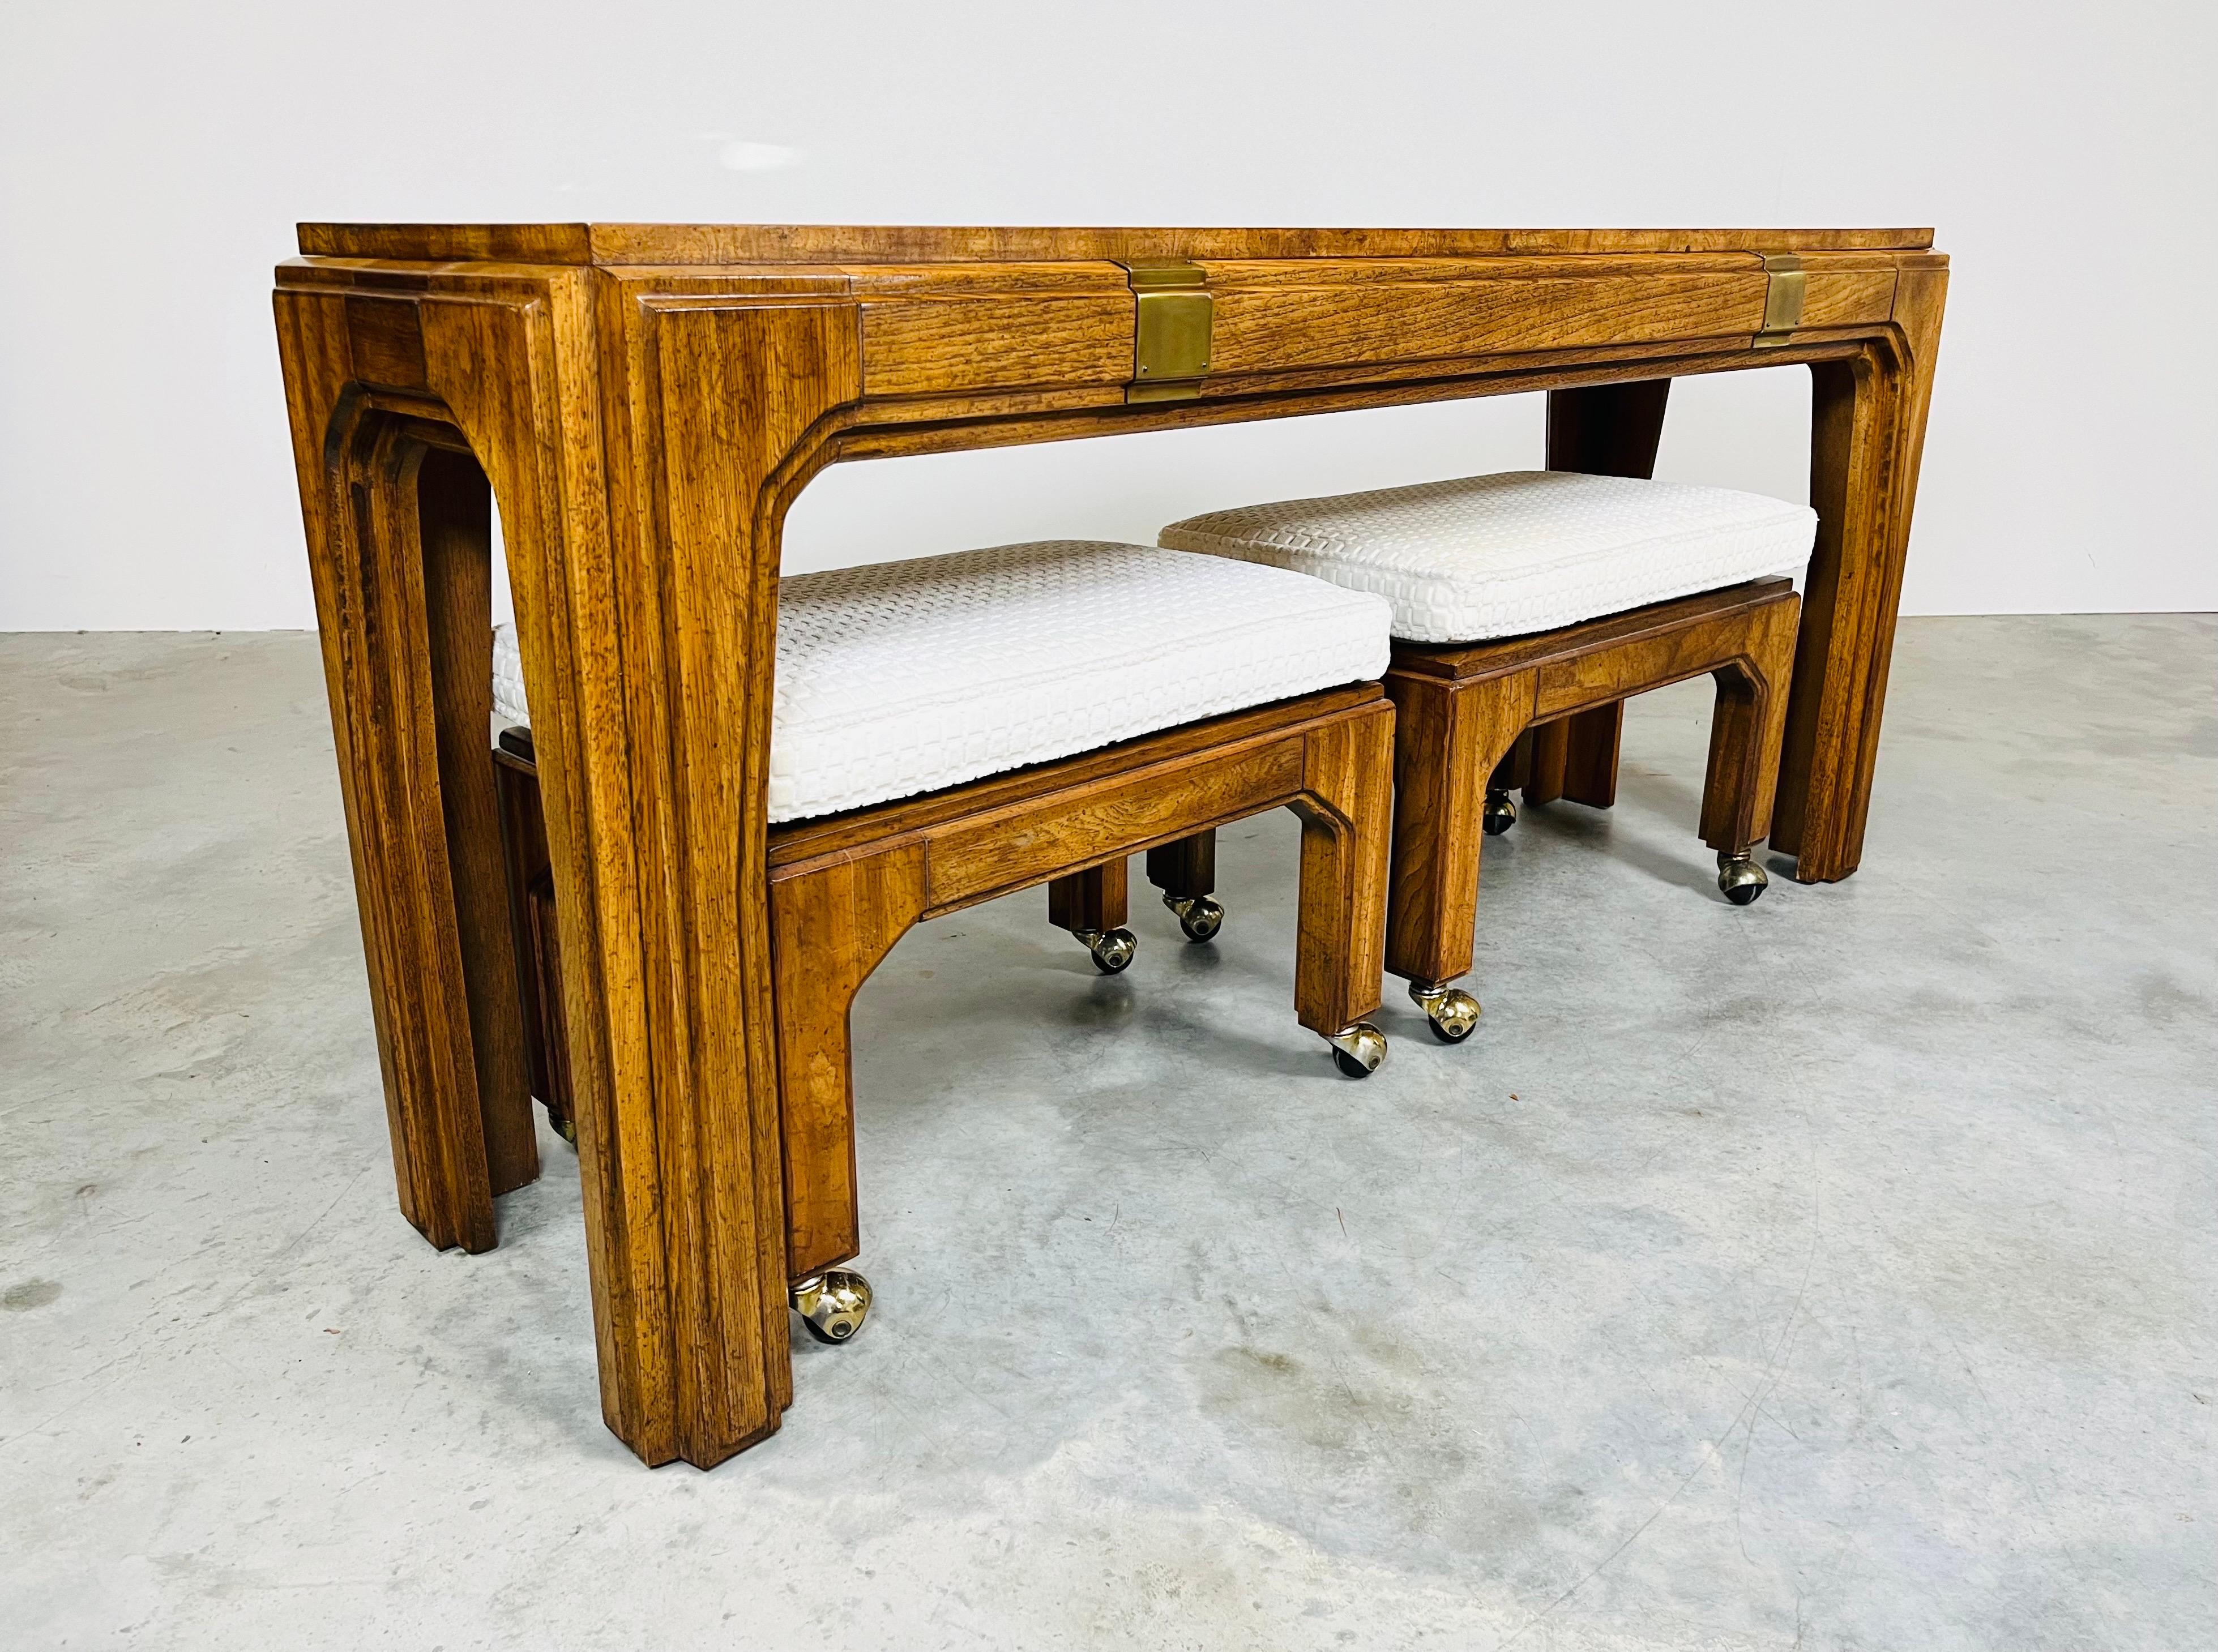 A beautiful 3-piece Hollywood Regency console table having matching stow away benches with detachable cushions on ball casters attributed to Henredon. The console table and benches are constructed of solid mahogany with olive wood center top on the